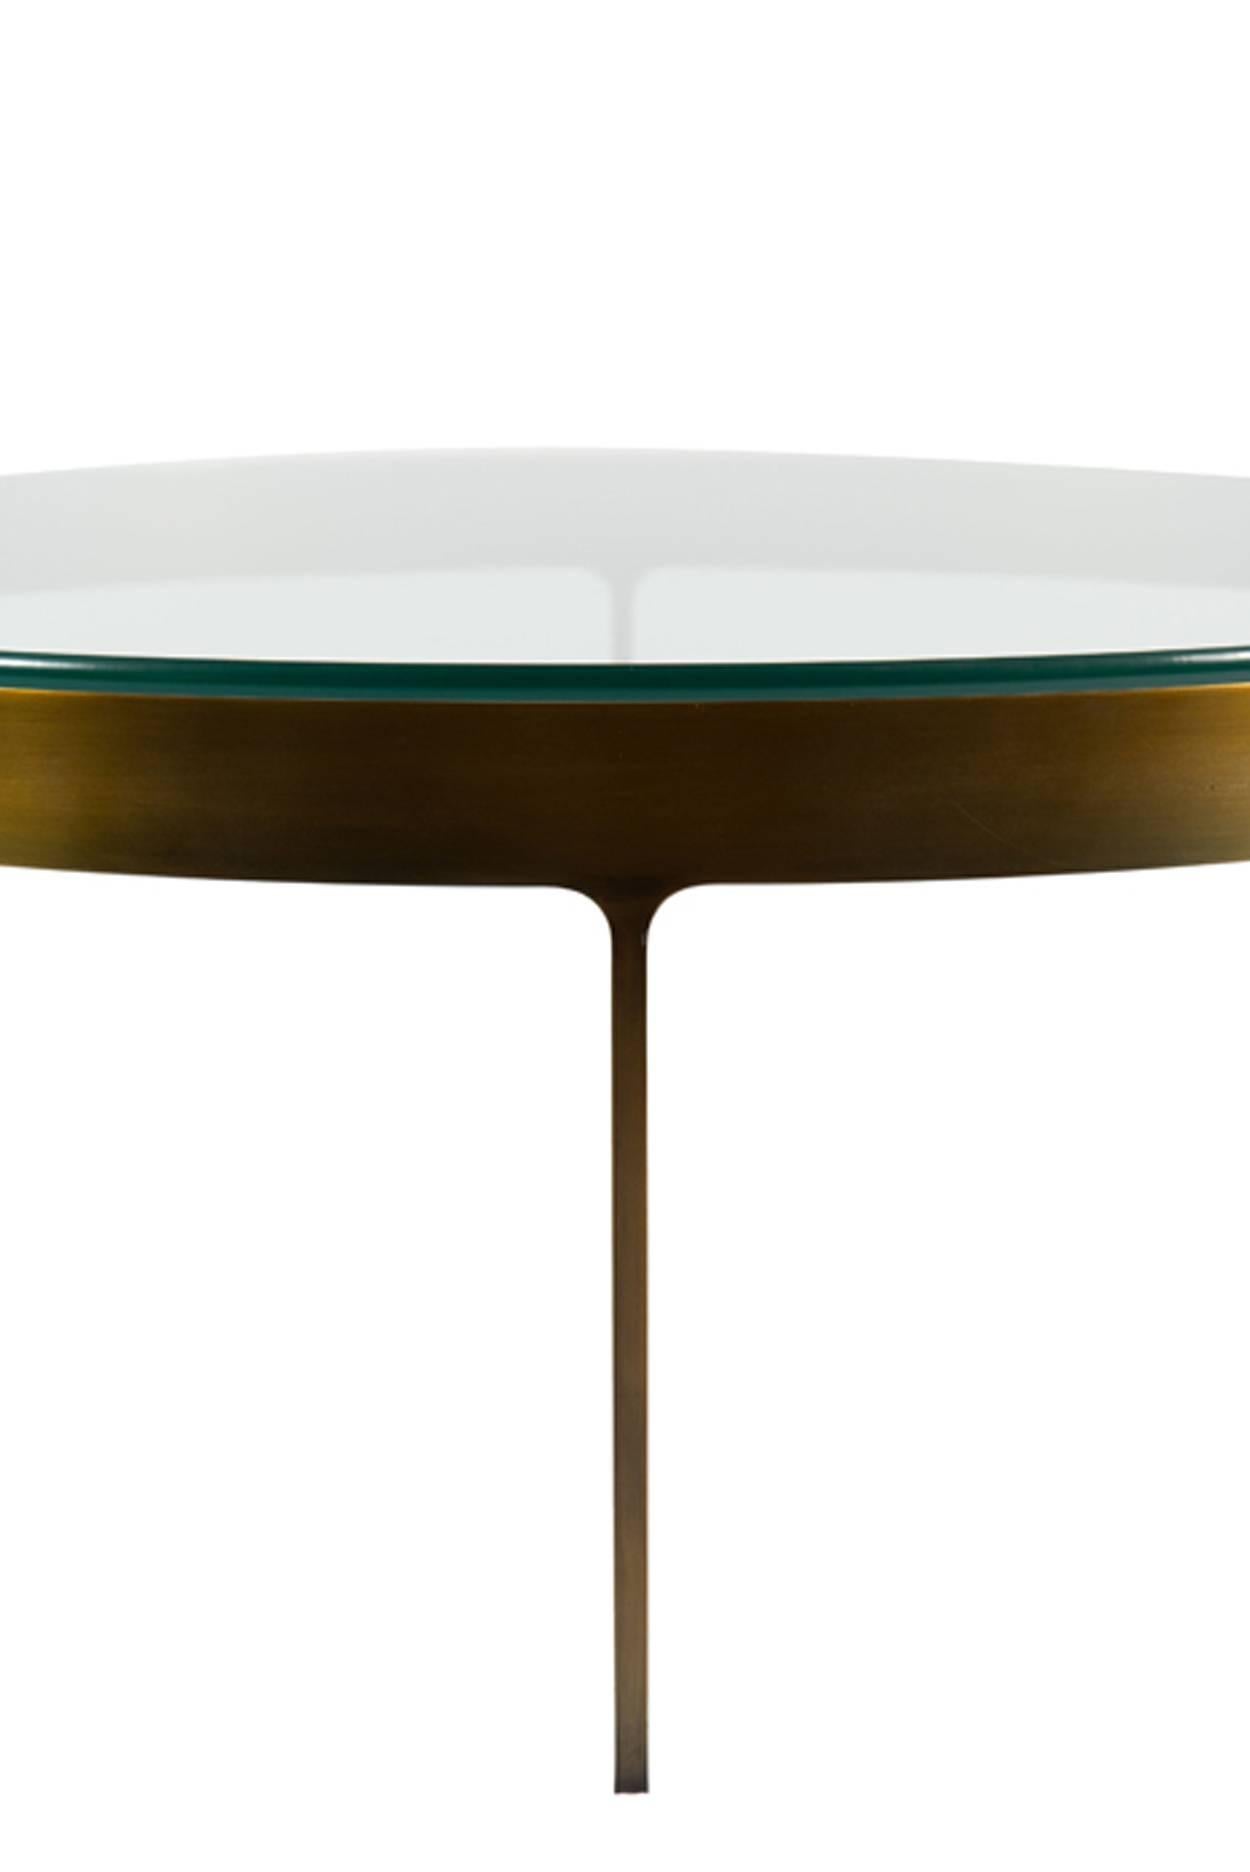 American Haworth Ring Cocktail Table For Sale